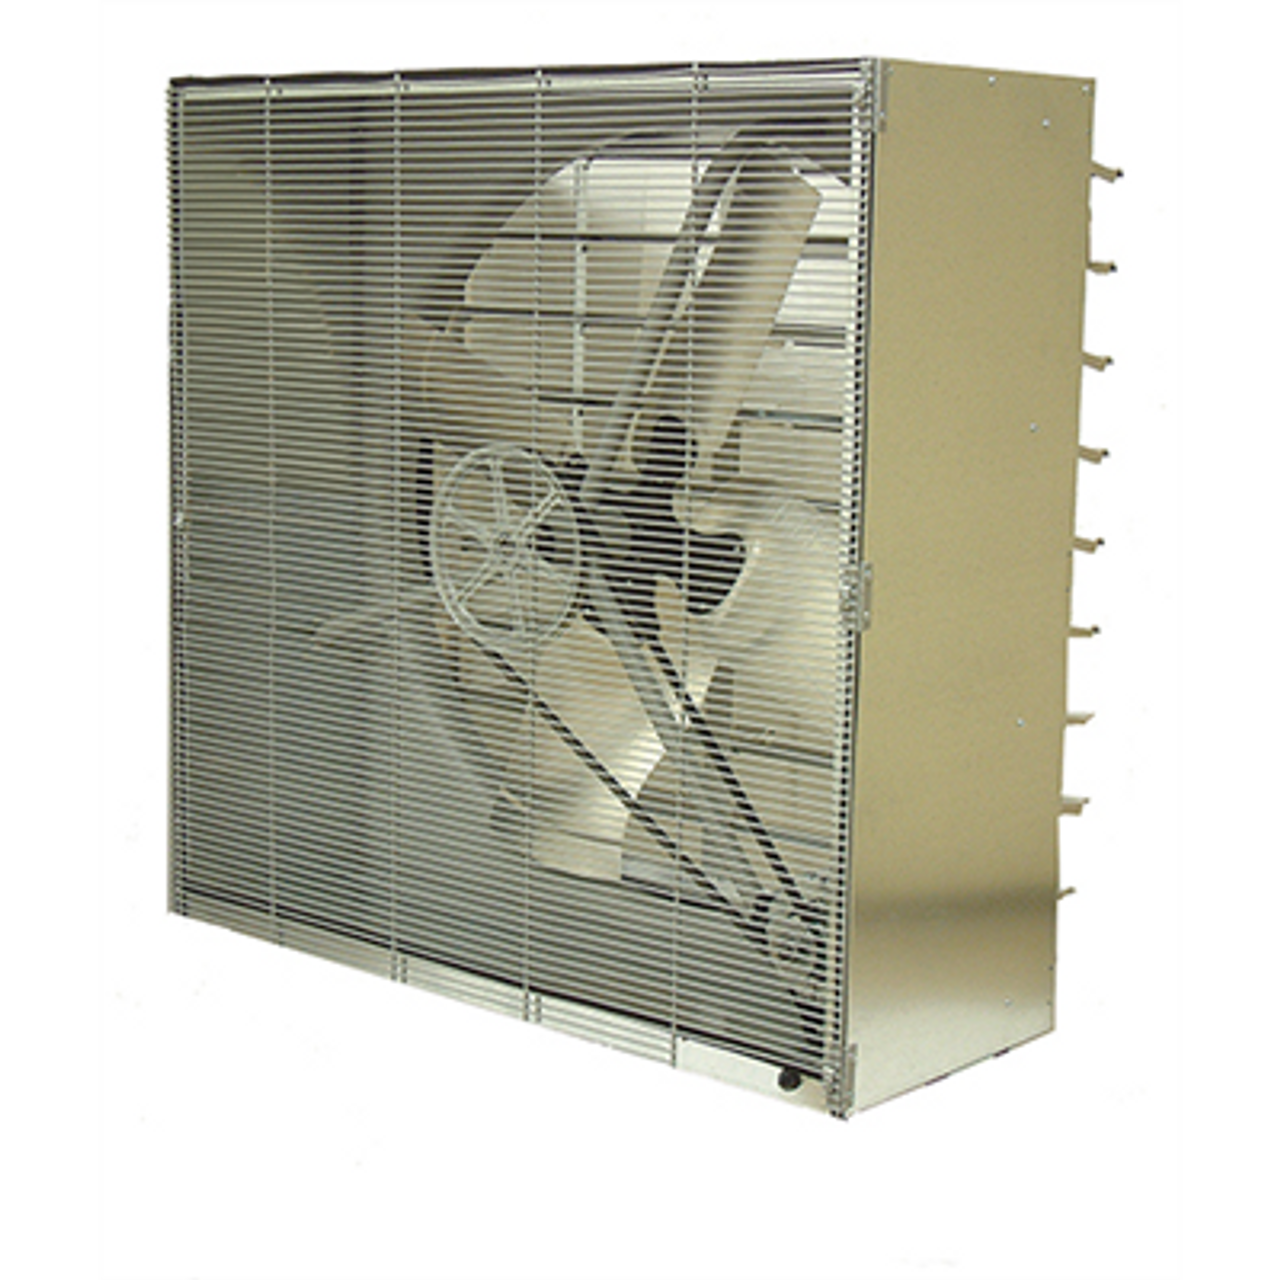 36" Cabinet Belt Drive Exhaust Fan with Shutters, 115V, 1 Phase, 1/2 HP